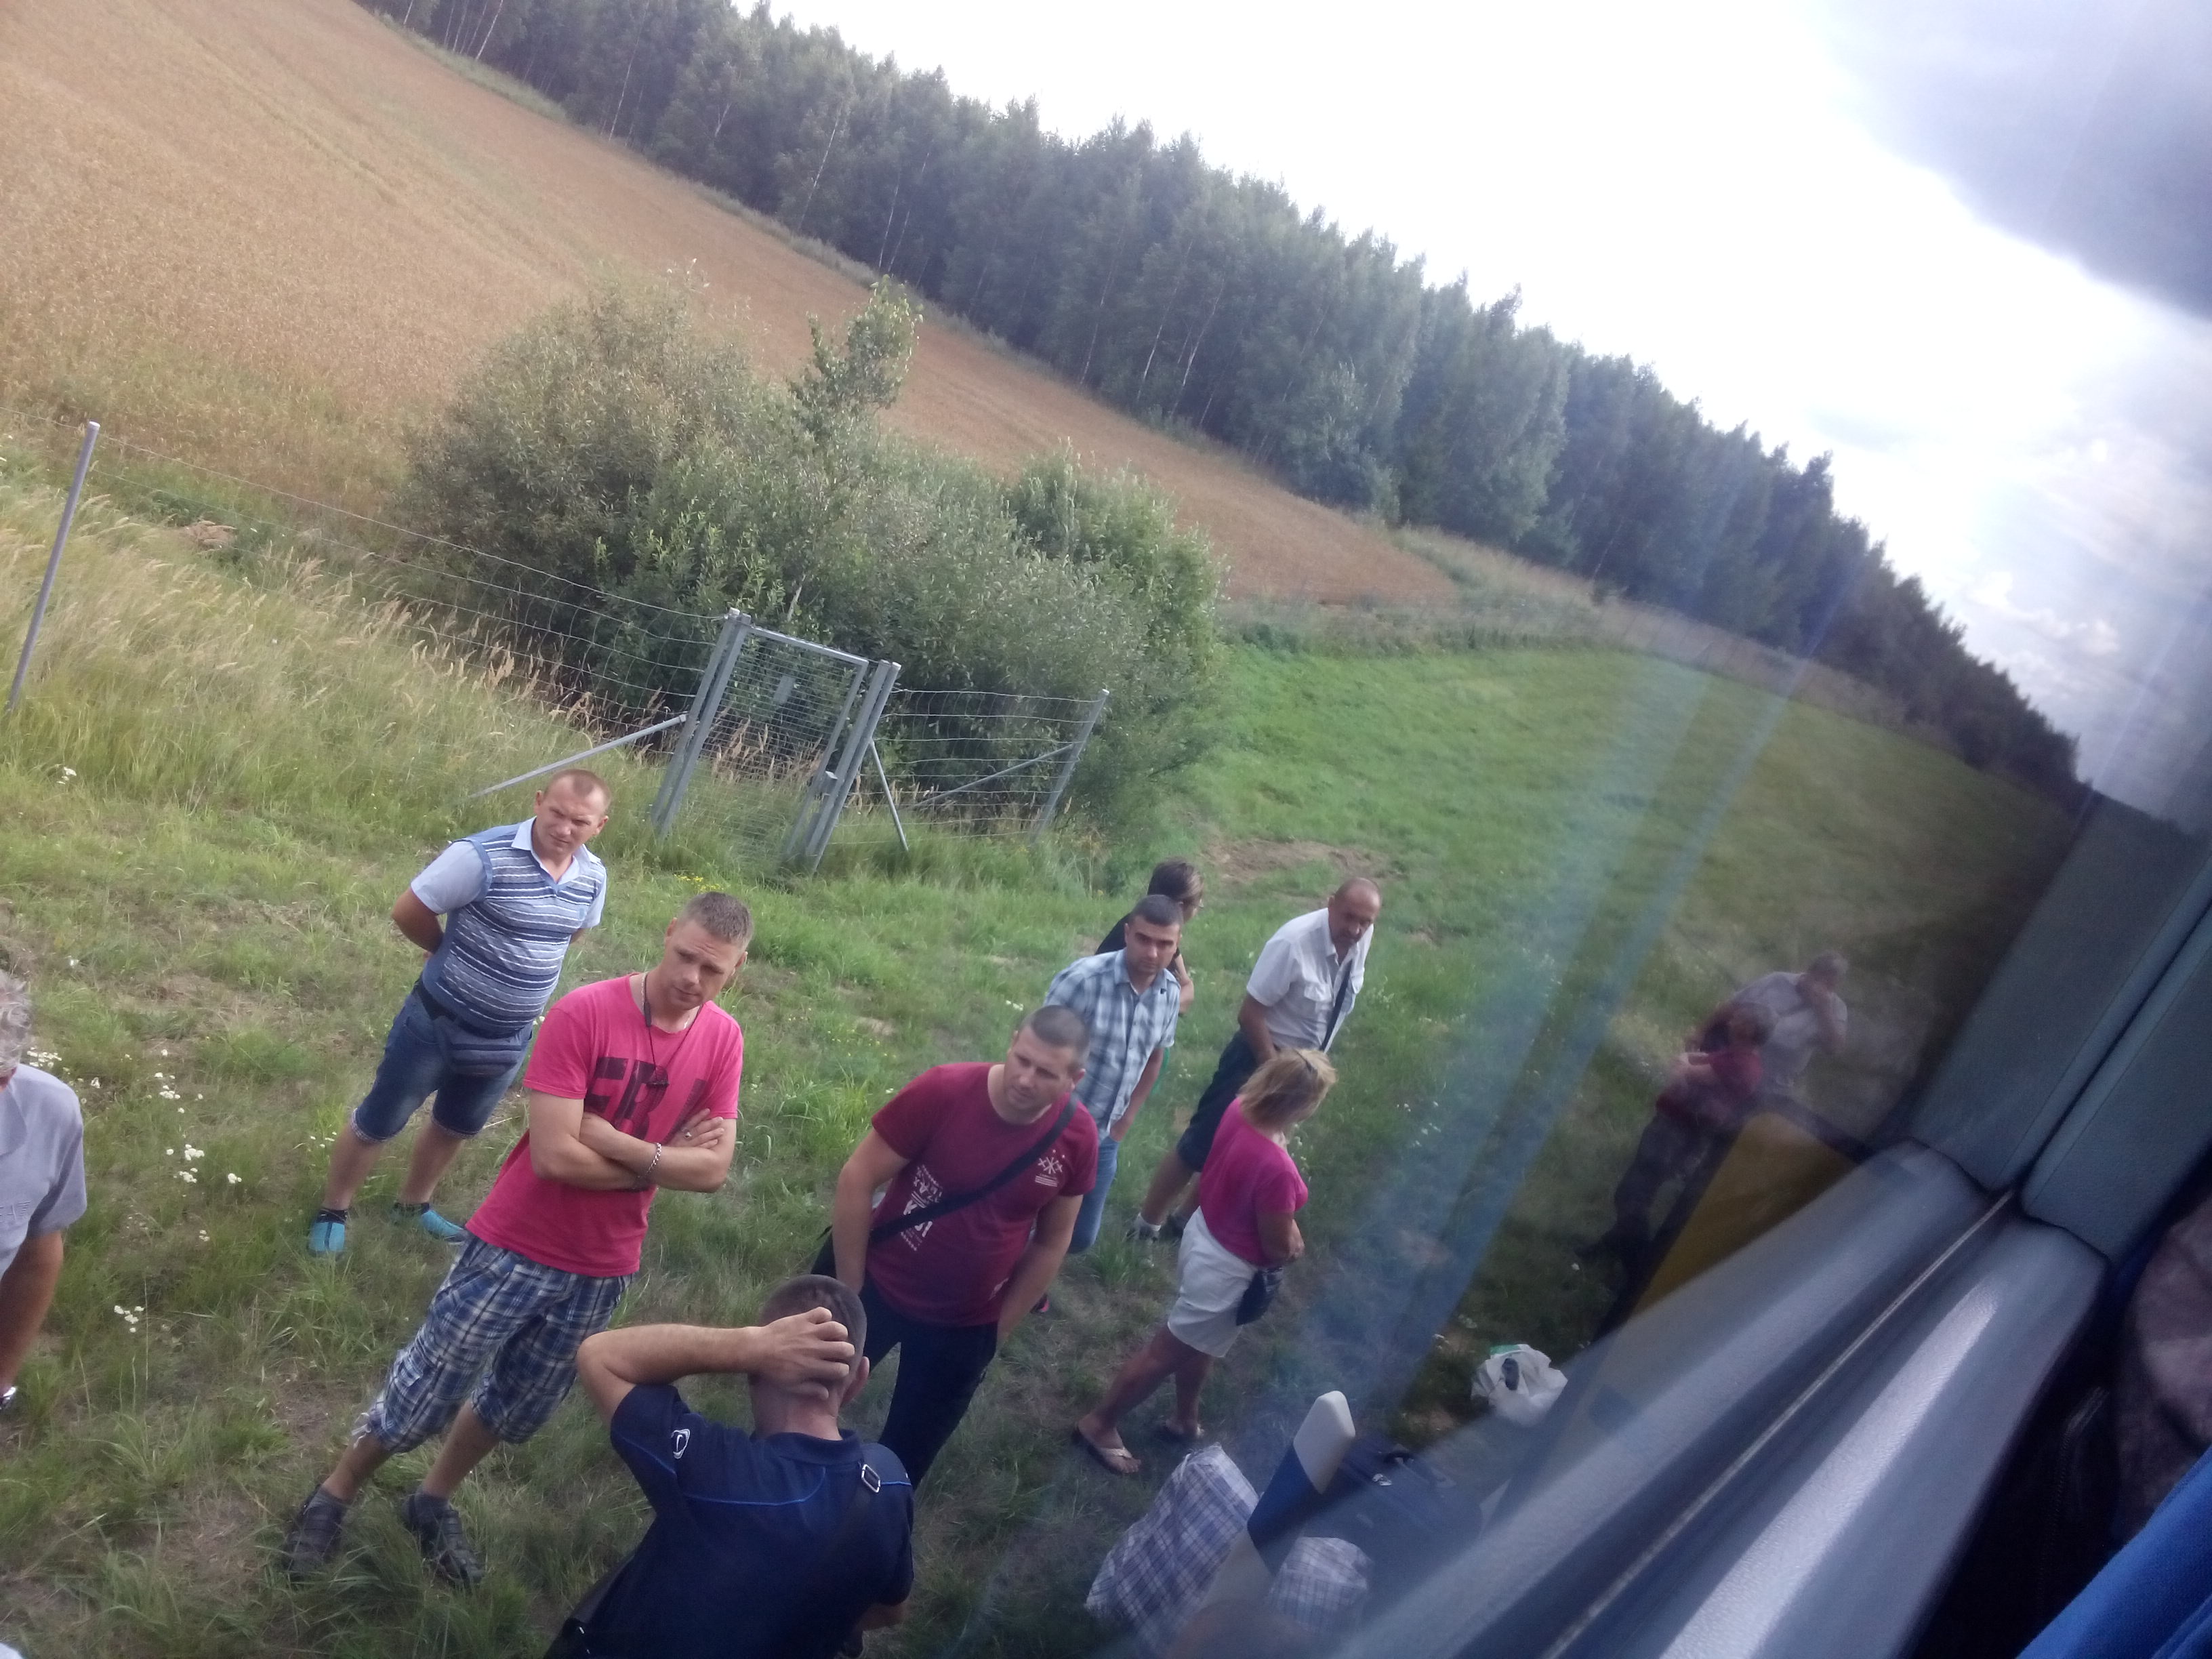 A view from inside a bus of people standing on a grassy verge on a cloudy day